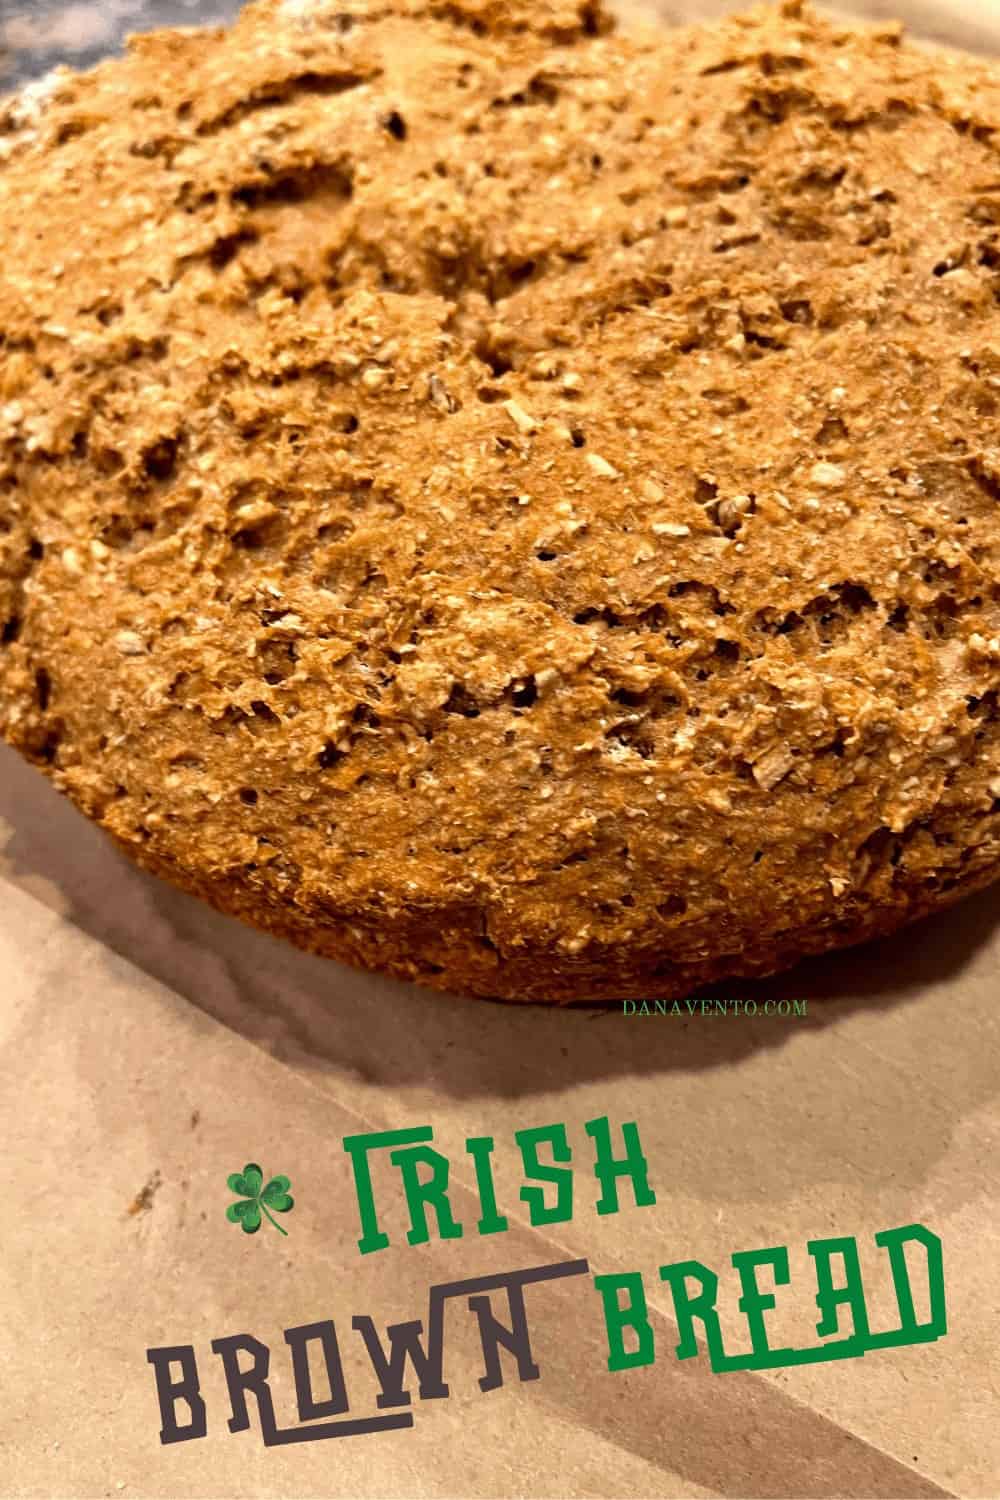 Traditional Irish Bread in 1 hour made on the counter to serve 